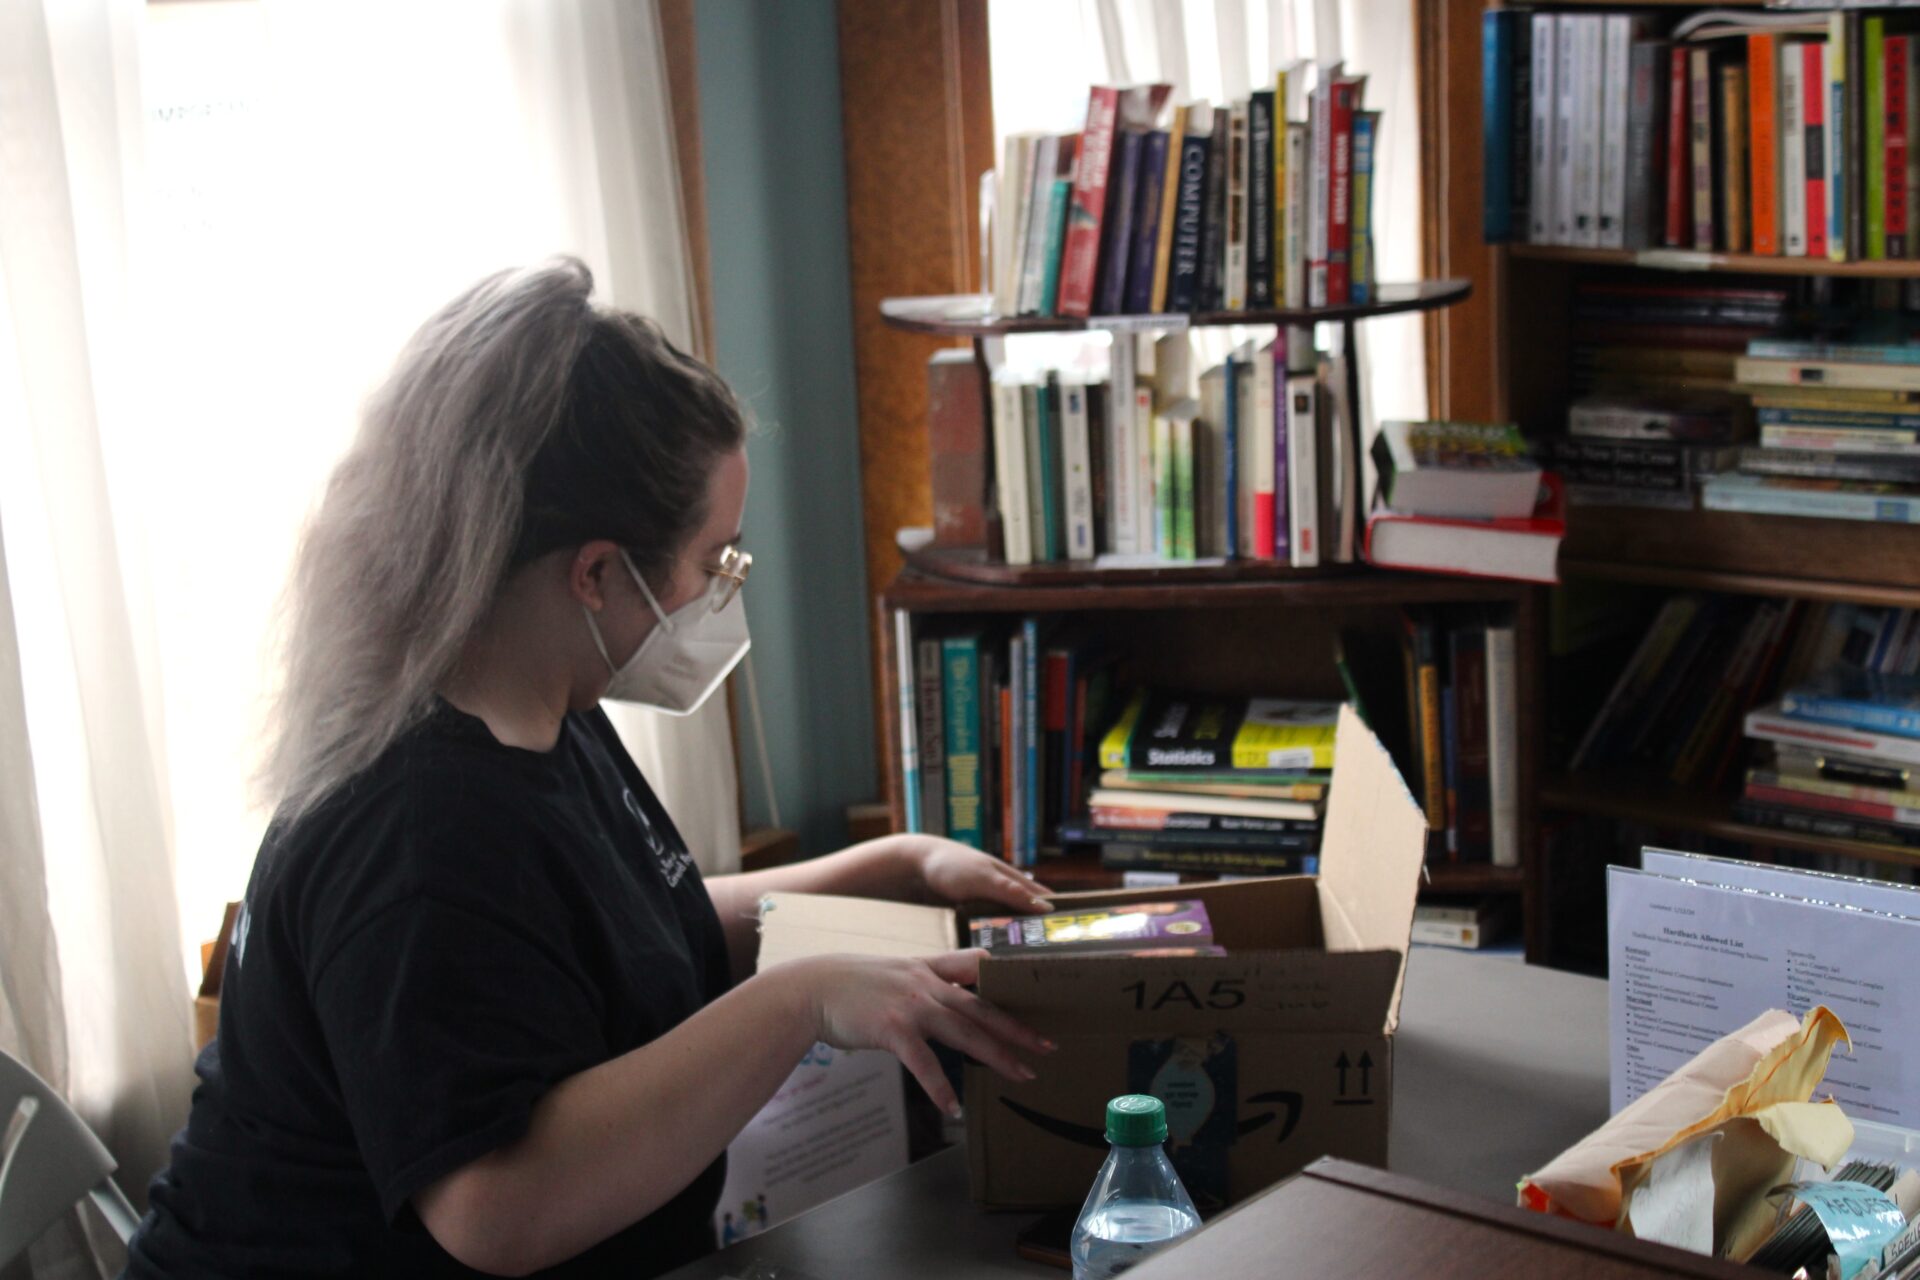 Morgantown Nonprofit Mails Books To People Incarcerated Across Appalachia